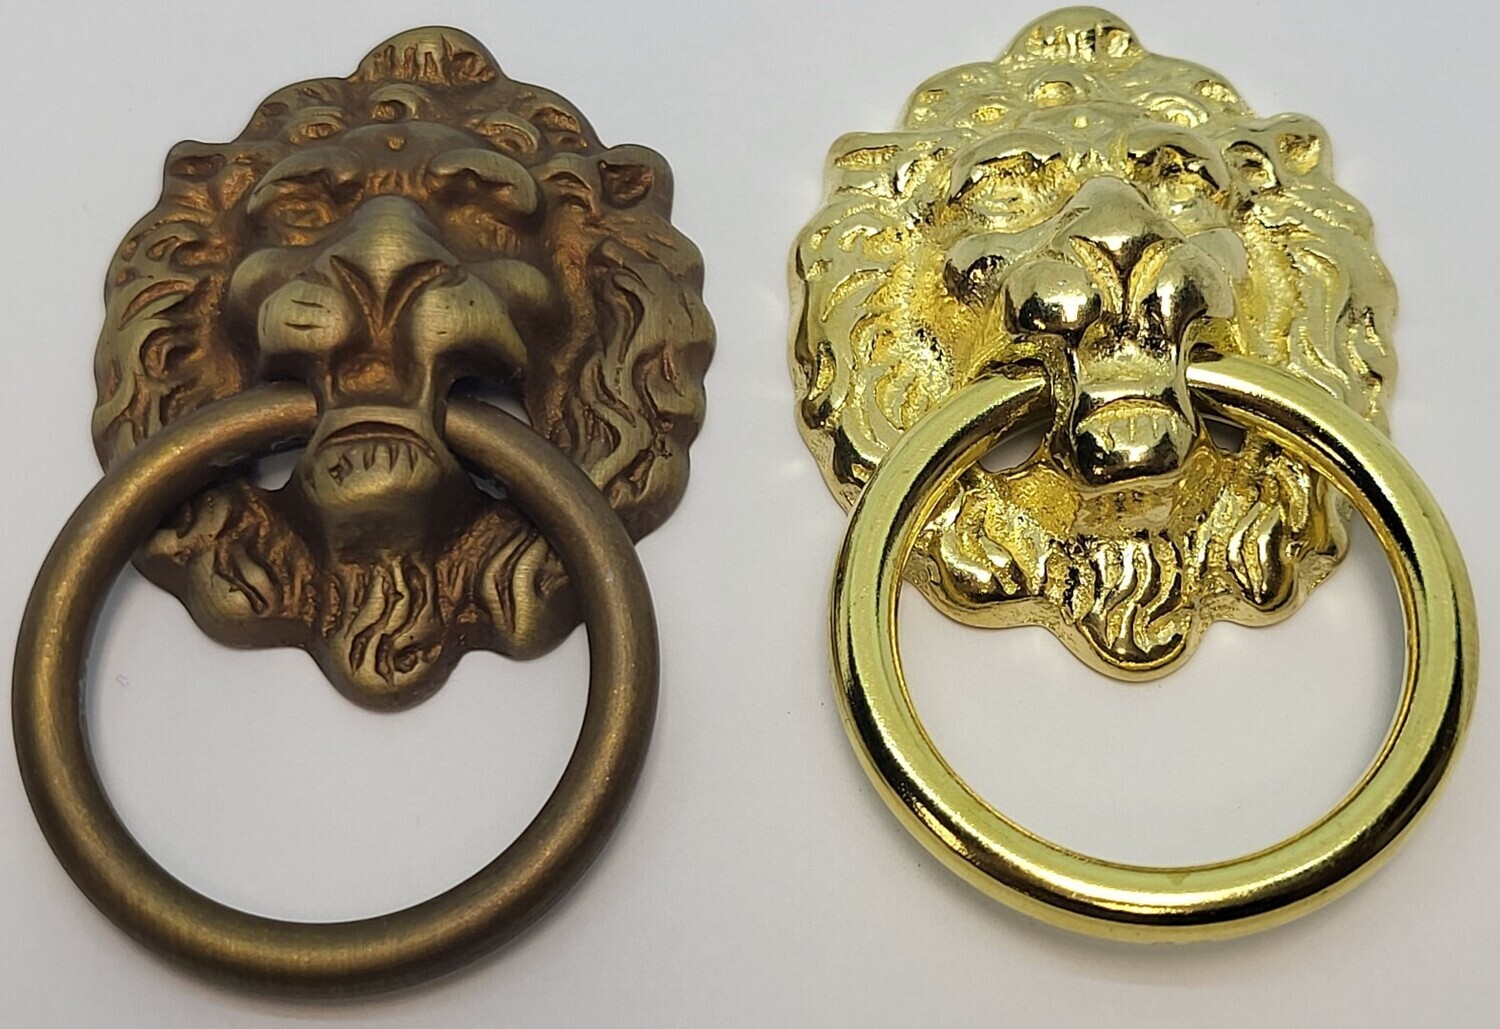 Solid brass Duncan Phyfe style Lion Head knocker ring Pull Early American SINGLE POST handle knob antique vintage retro old fancy decorative